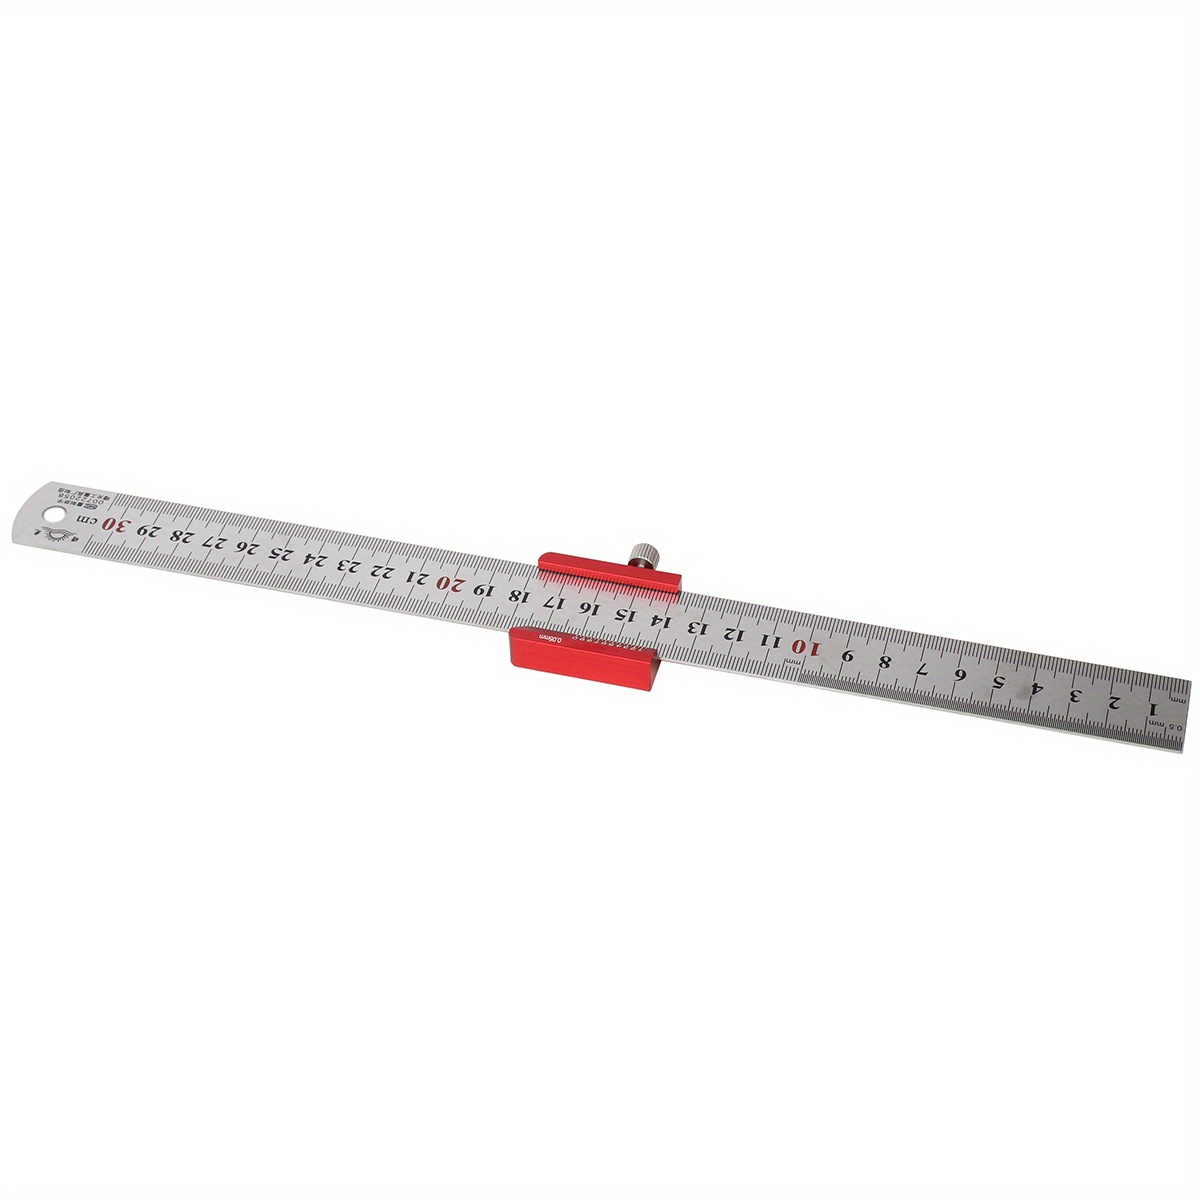 360°sAngle Ruler Woodworking Layout Tools Drawing Measurement Tool  HighsPrecision Woodworking Scriber Gauge Industrial Layout Hand Tool  Woodworking